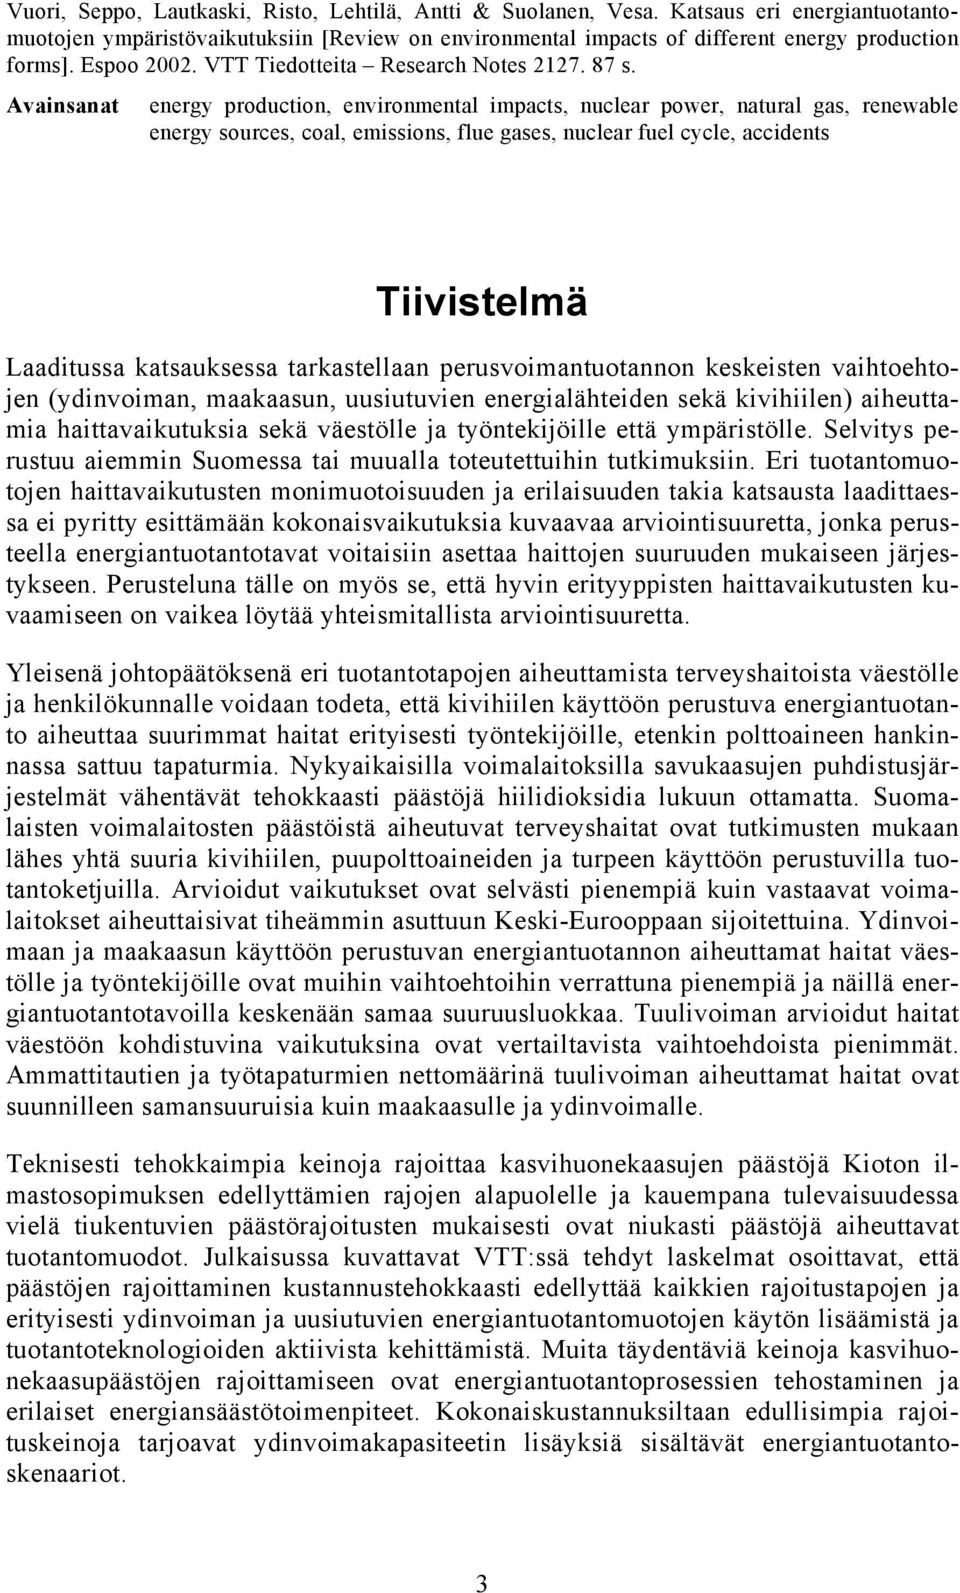 Avainsanat energy production, environmental impacts, nuclear power, natural gas, renewable energy sources, coal, emissions, flue gases, nuclear fuel cycle, accidents Tiivistelmä Laaditussa